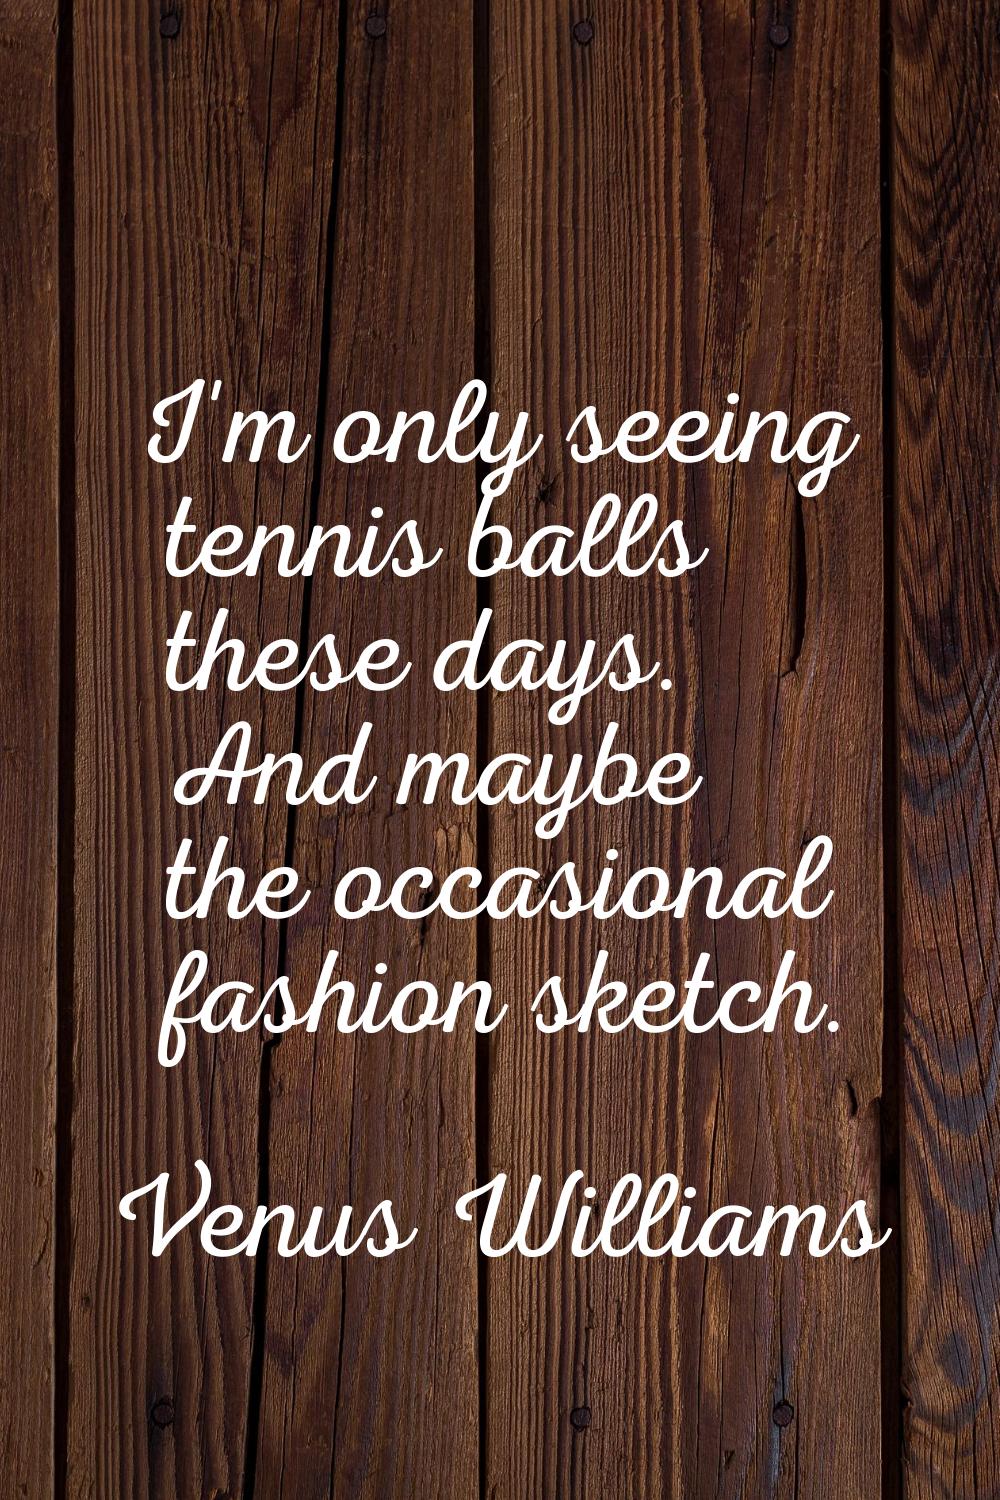 I'm only seeing tennis balls these days. And maybe the occasional fashion sketch.